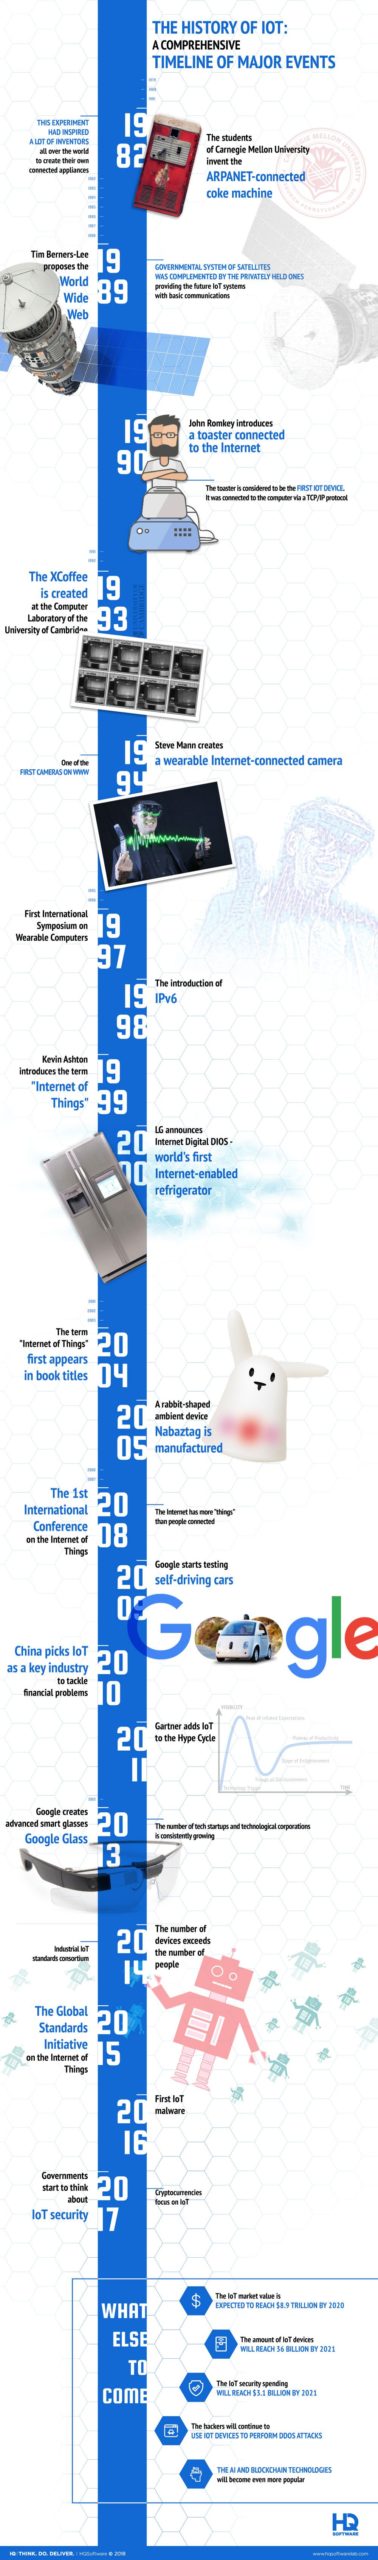 History-of-IoT (InfoGraphic, better quality)